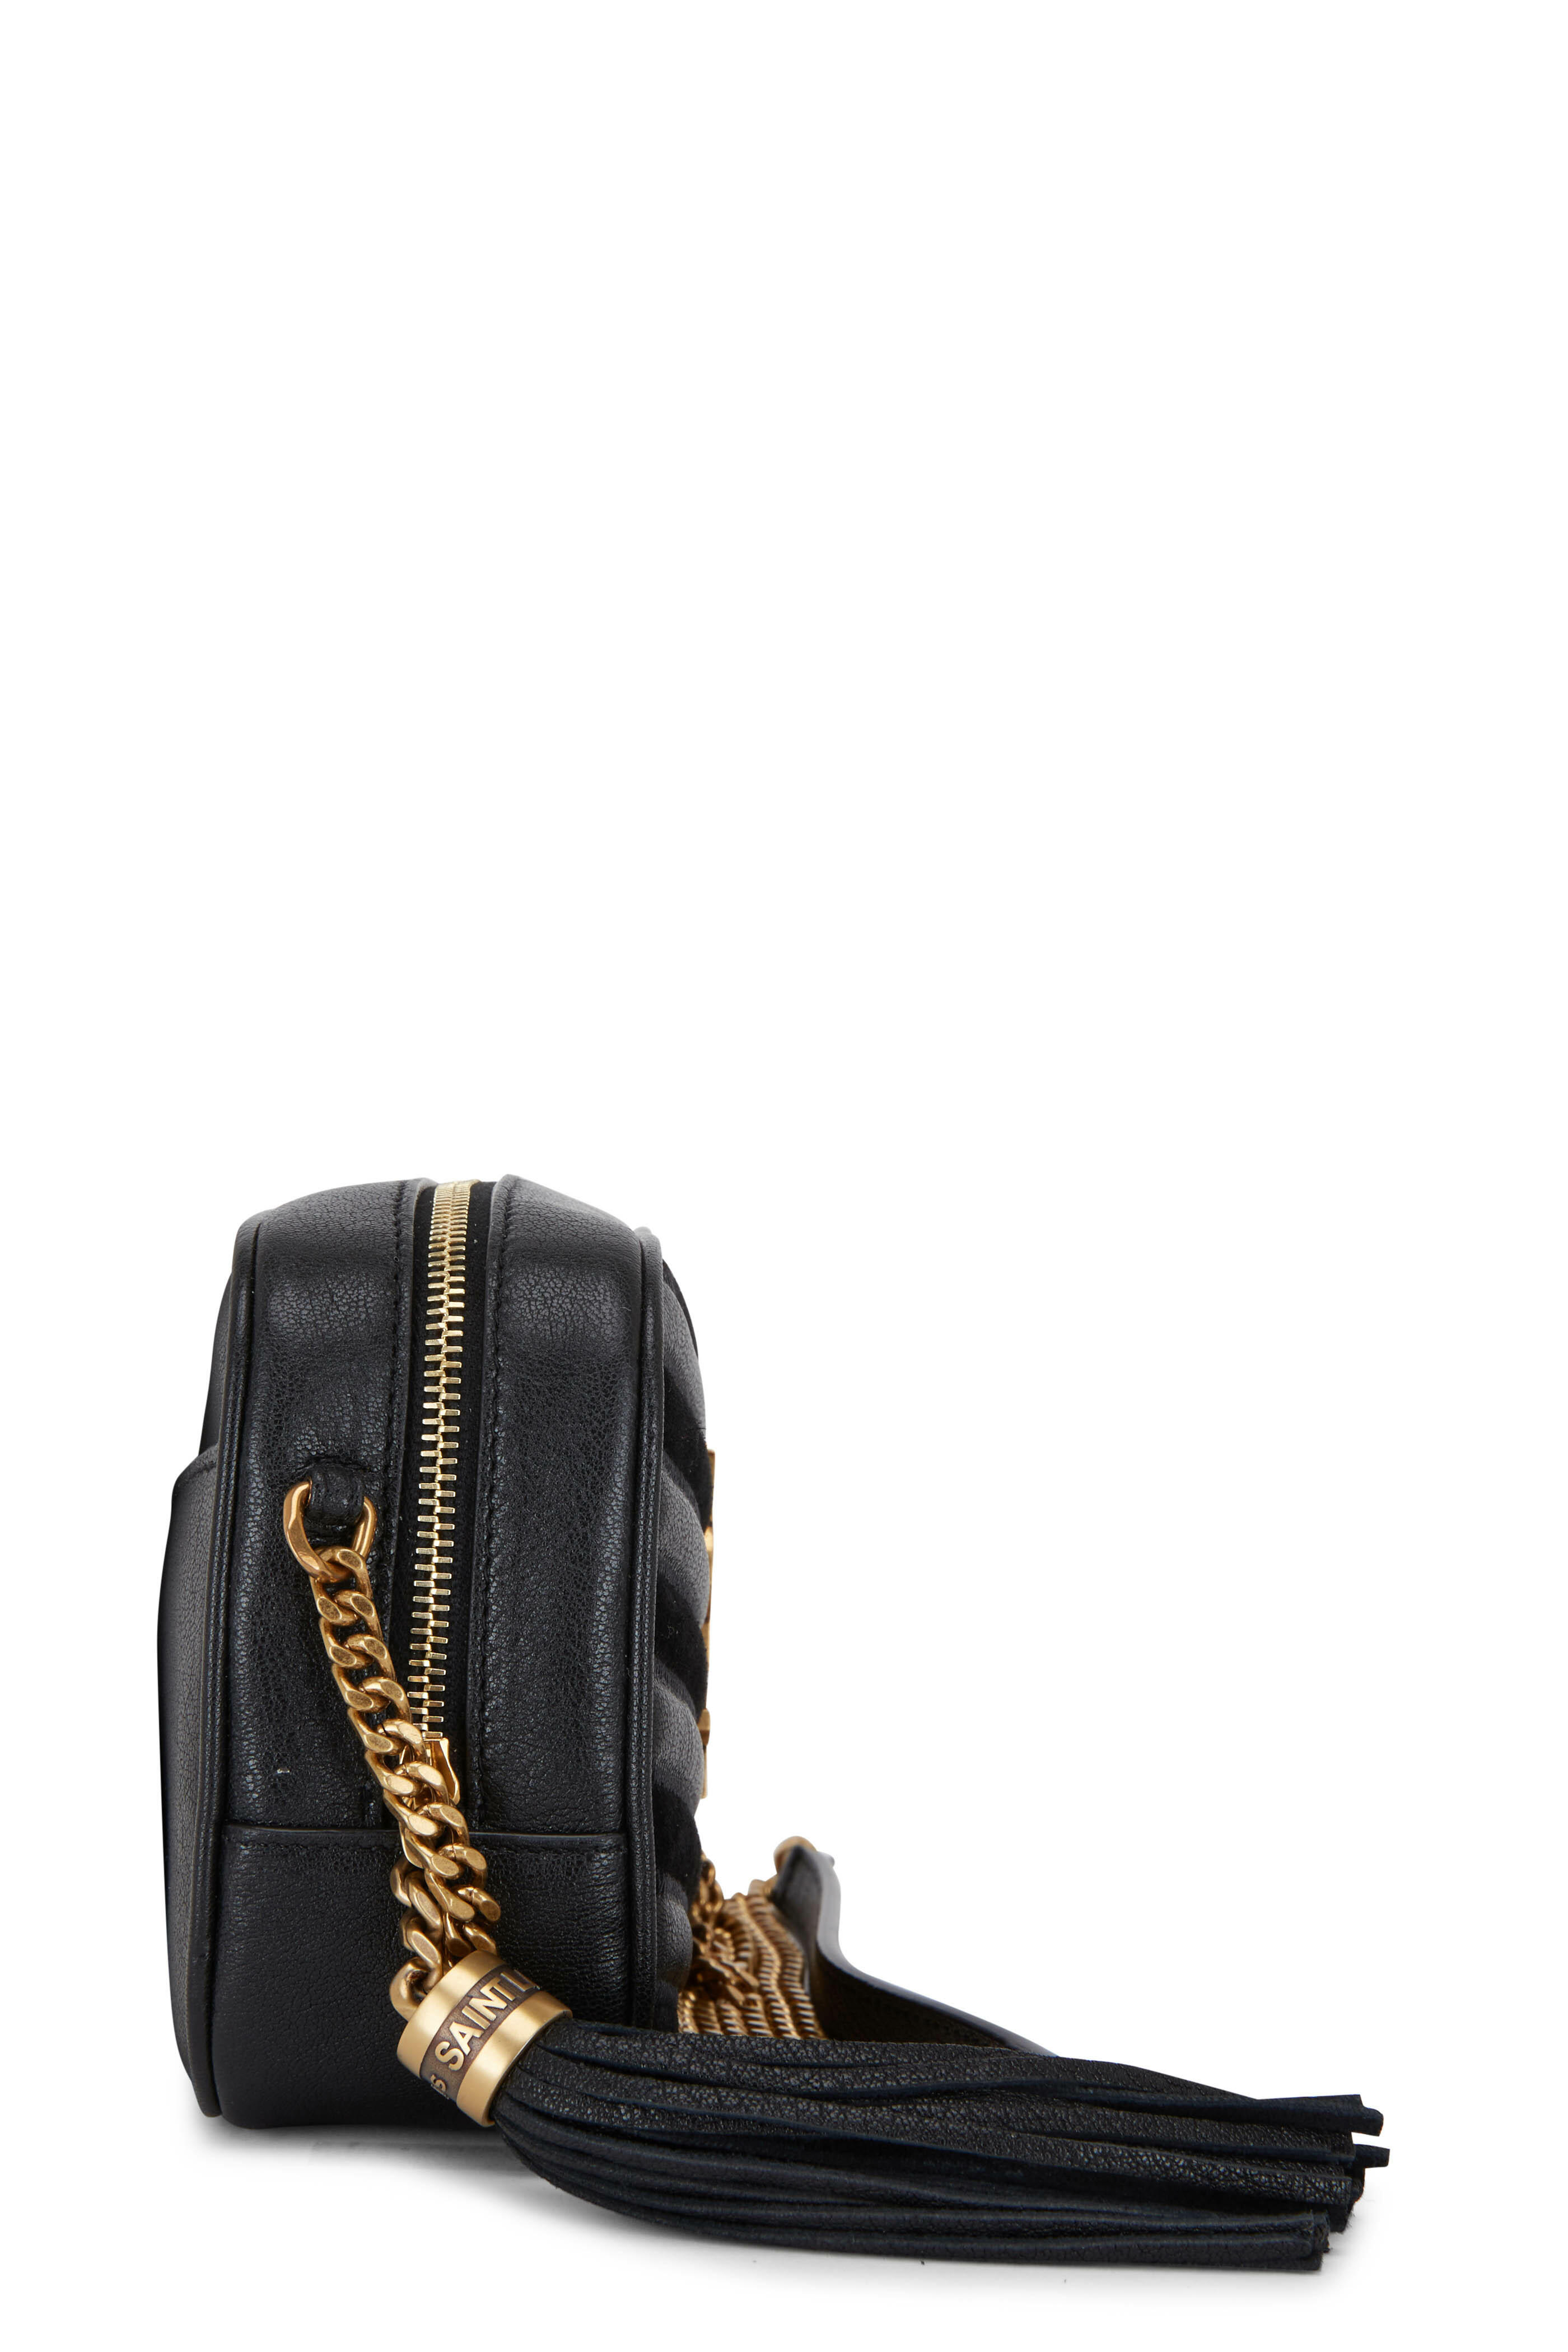 Saint Laurent Vicky Black Camera Bag in Quilted Patent Leather